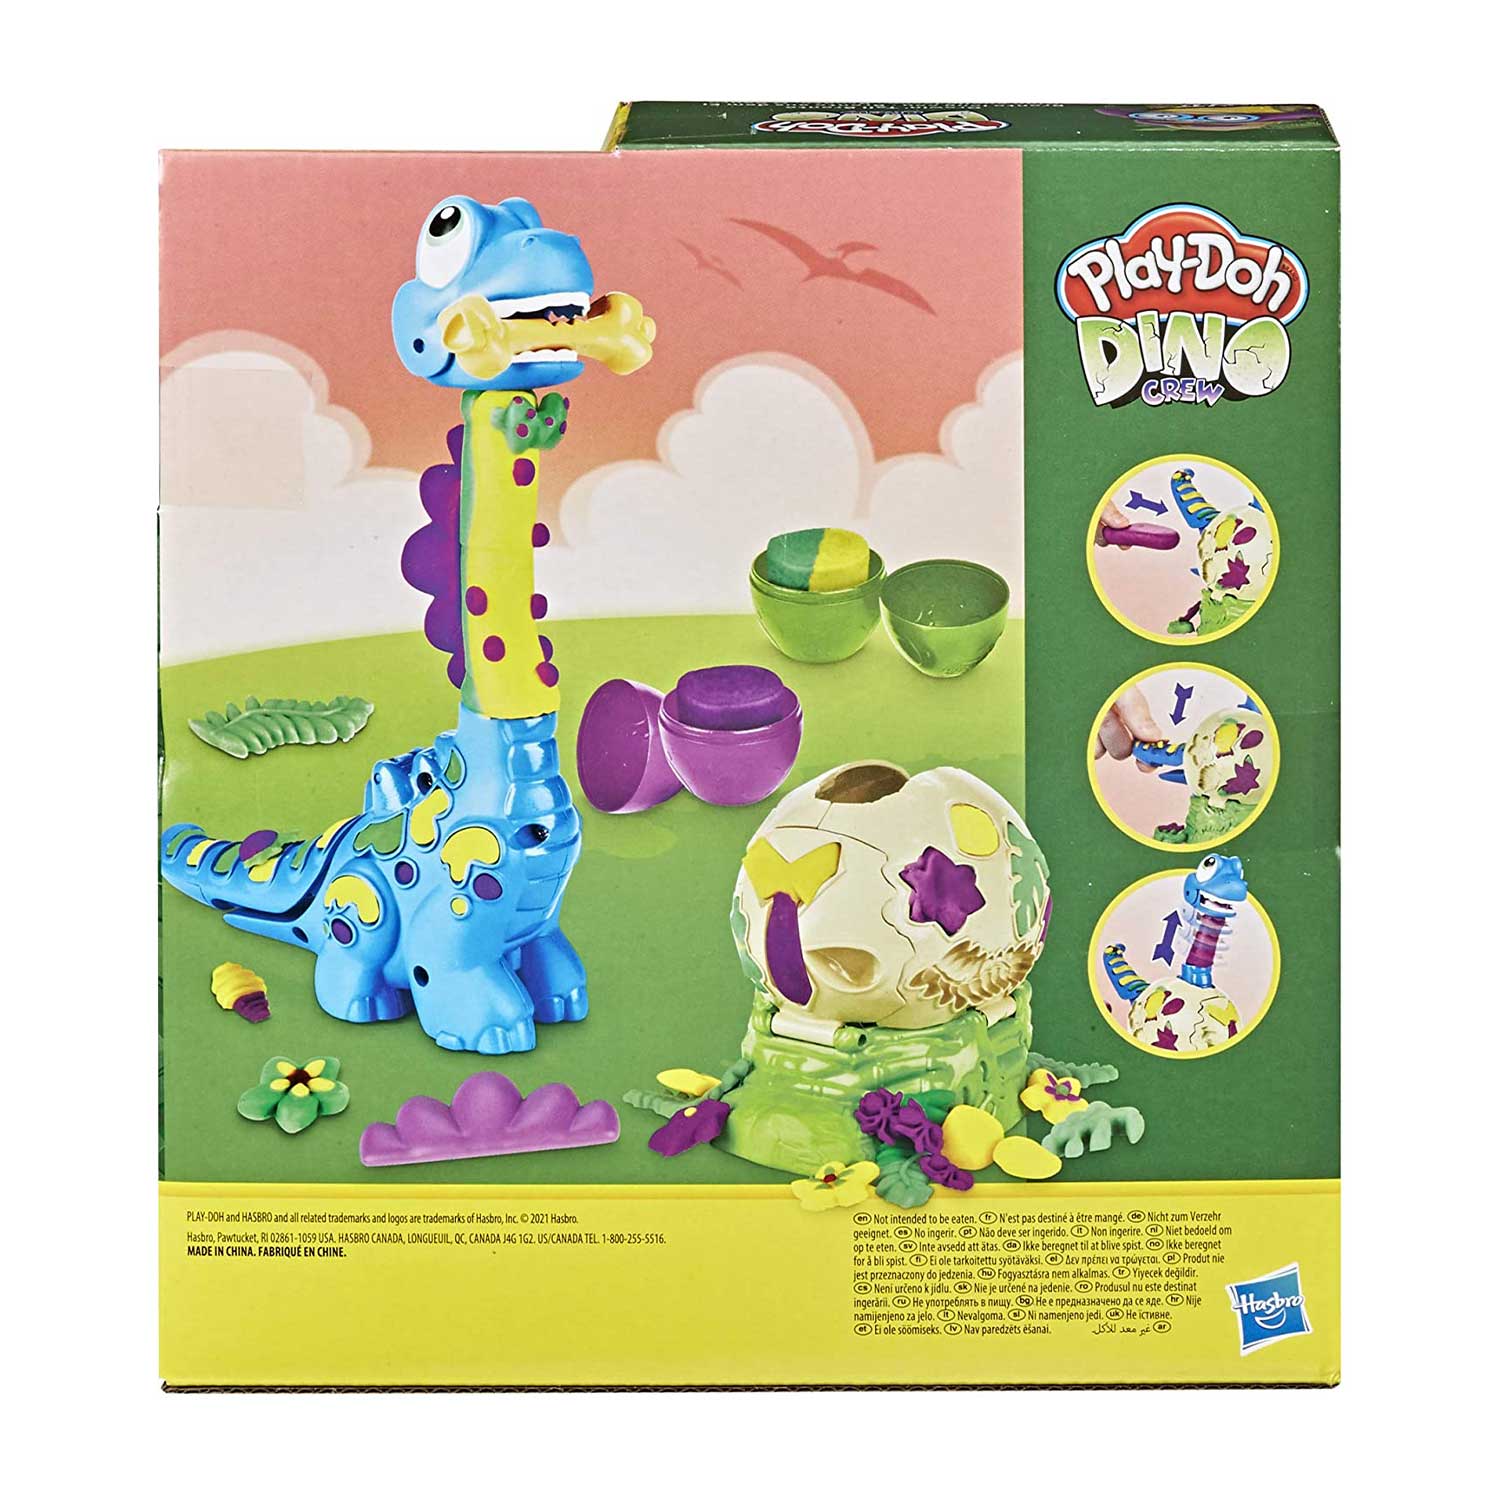 Play-Doh Dino Crew Growin' Tall Bronto Toy Dinosaur for Kids 3 Years and Up with 2 Play-Doh Eggs - Mod: HSBF15035L0